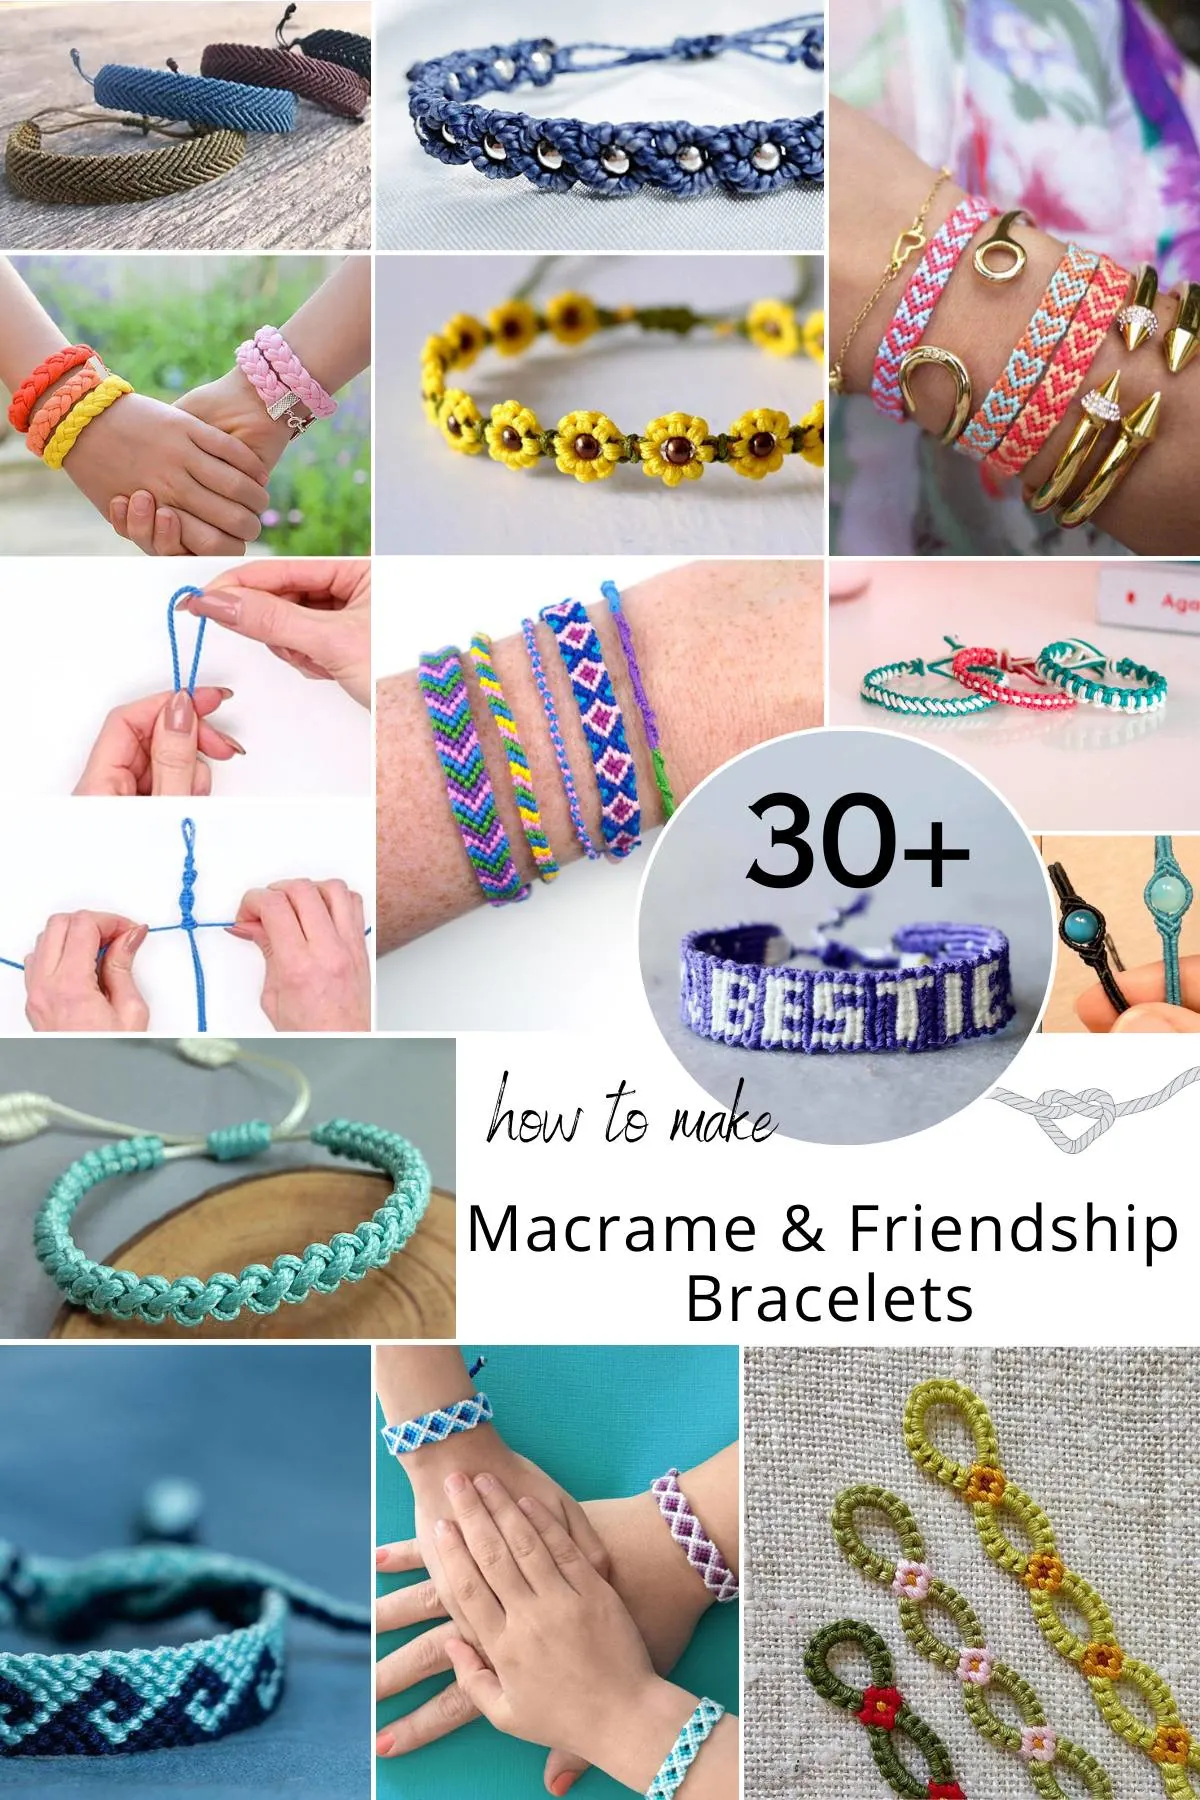 Macrame Bracelet Patterns to Try At Home